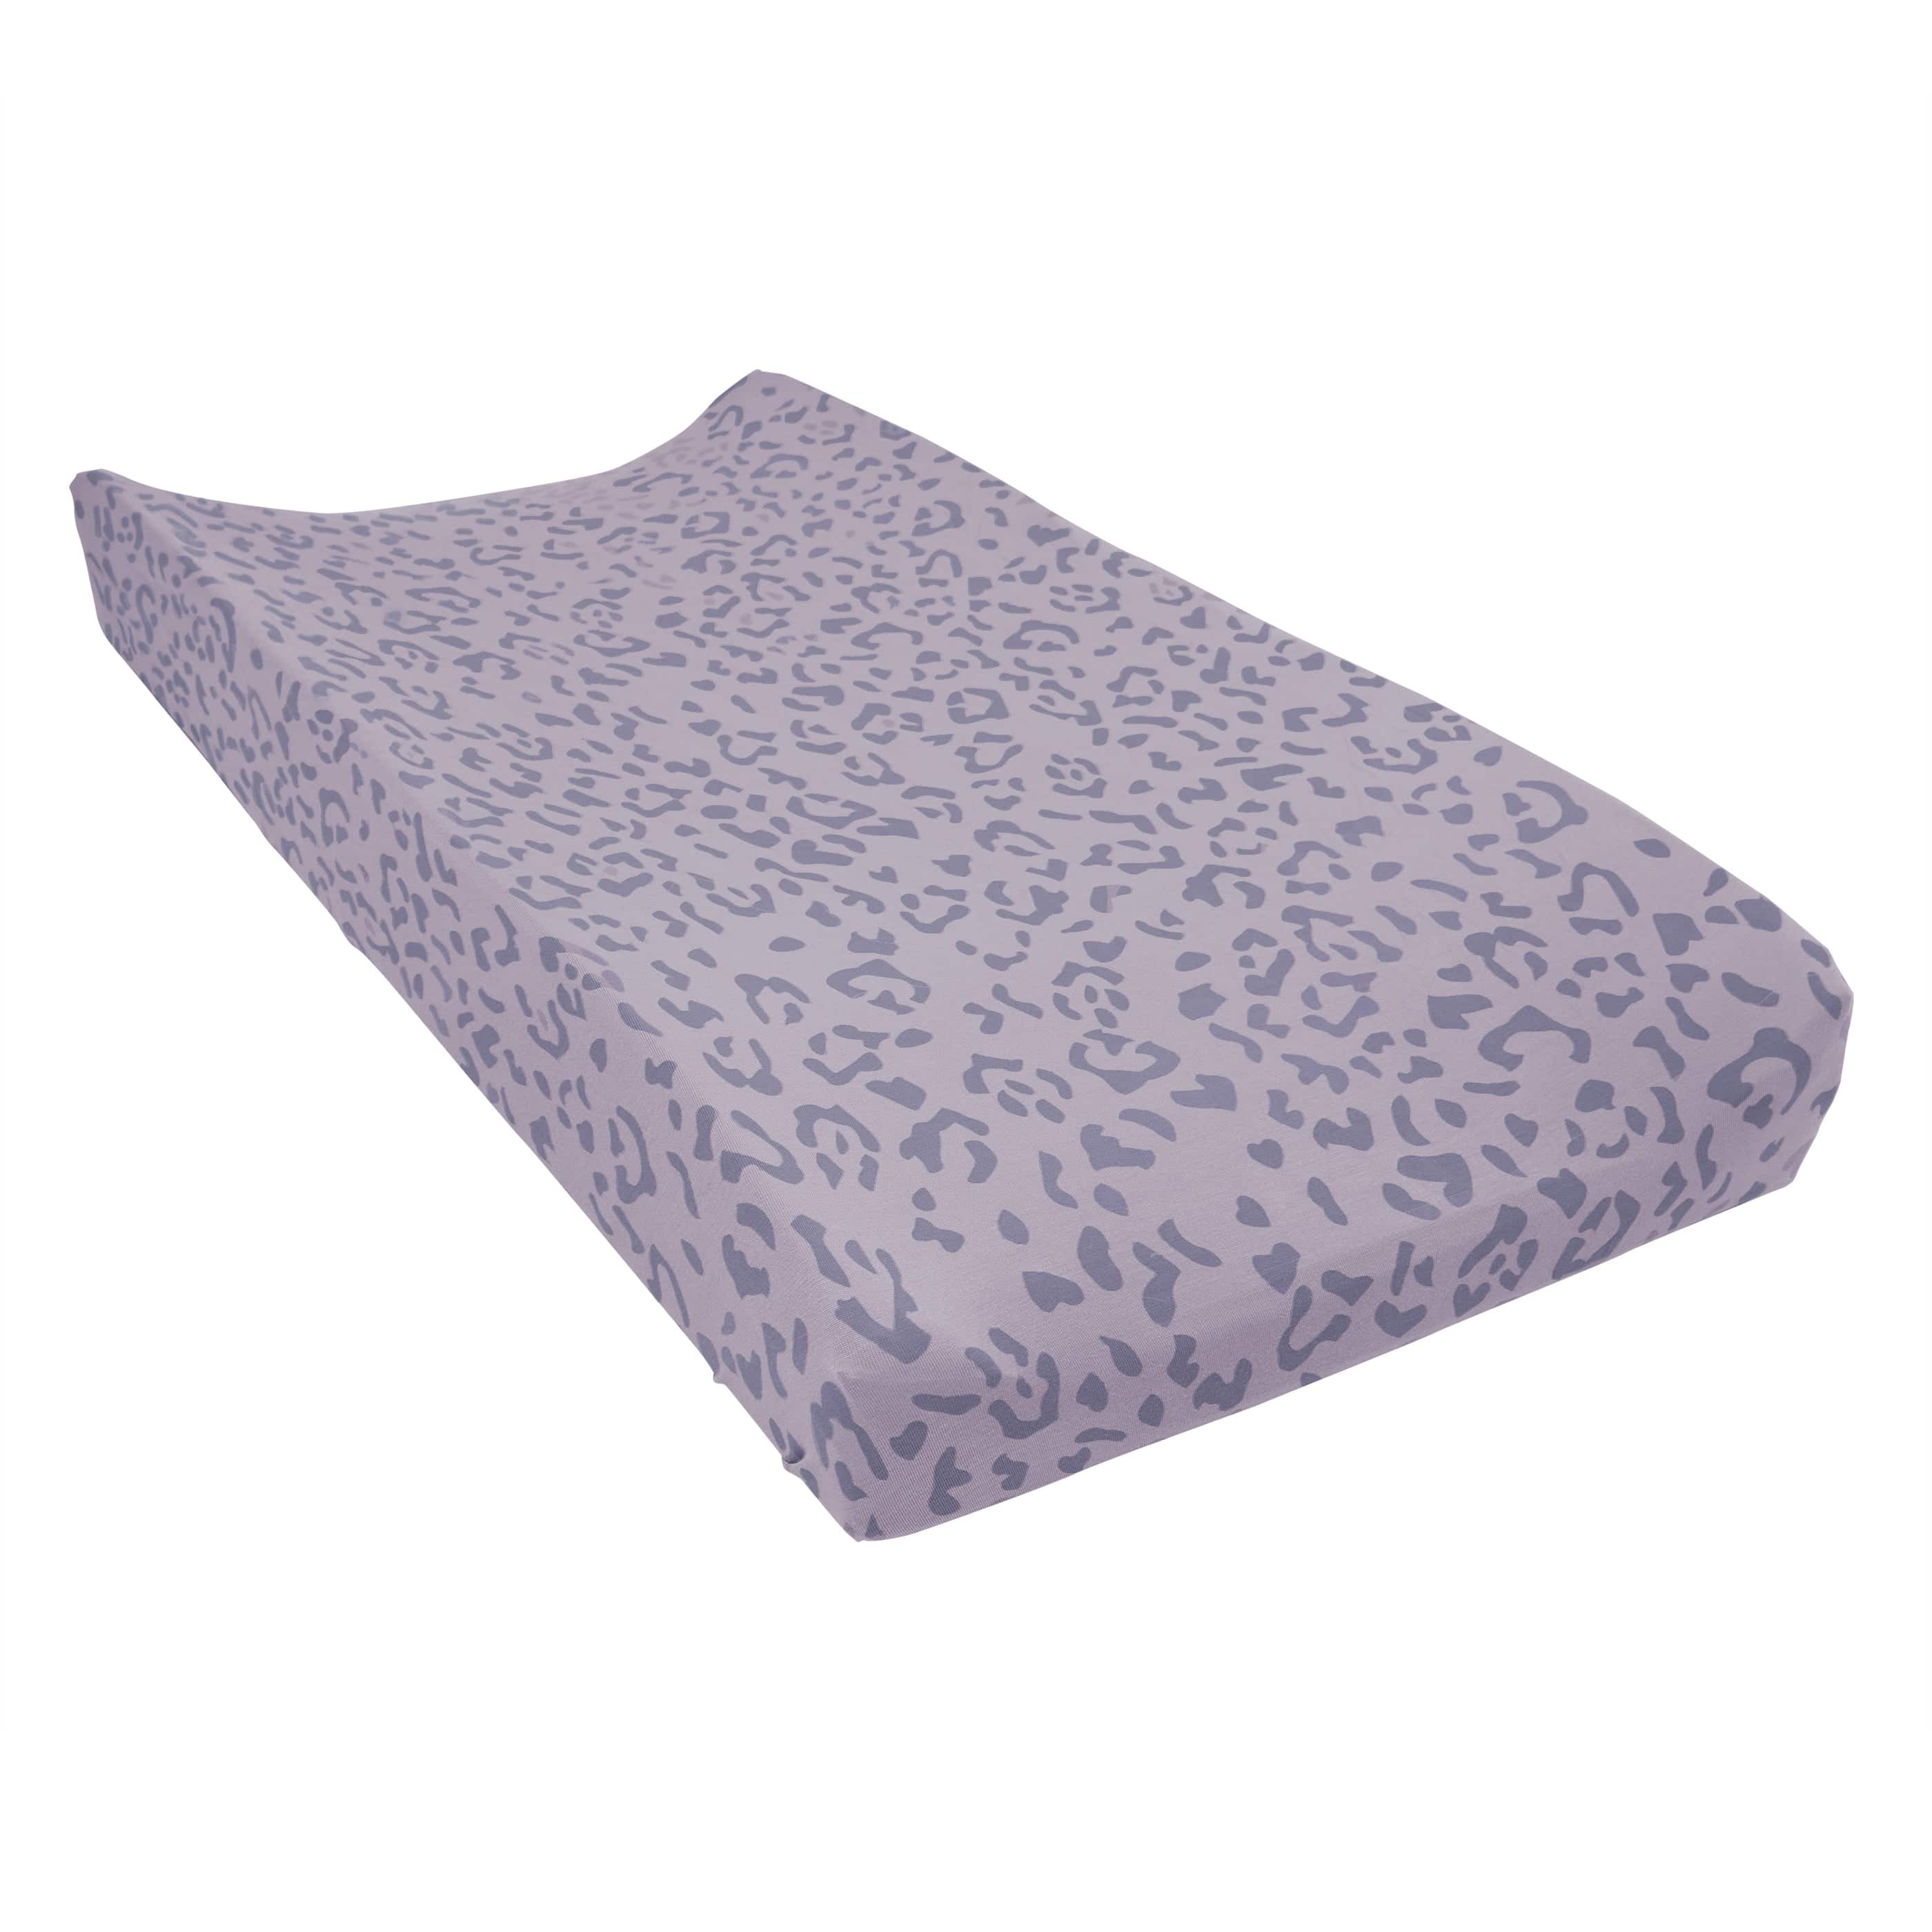 Kyte Baby Change Pad Cover Taro Leopard / One Size Change Pad Cover in Taro Leopard